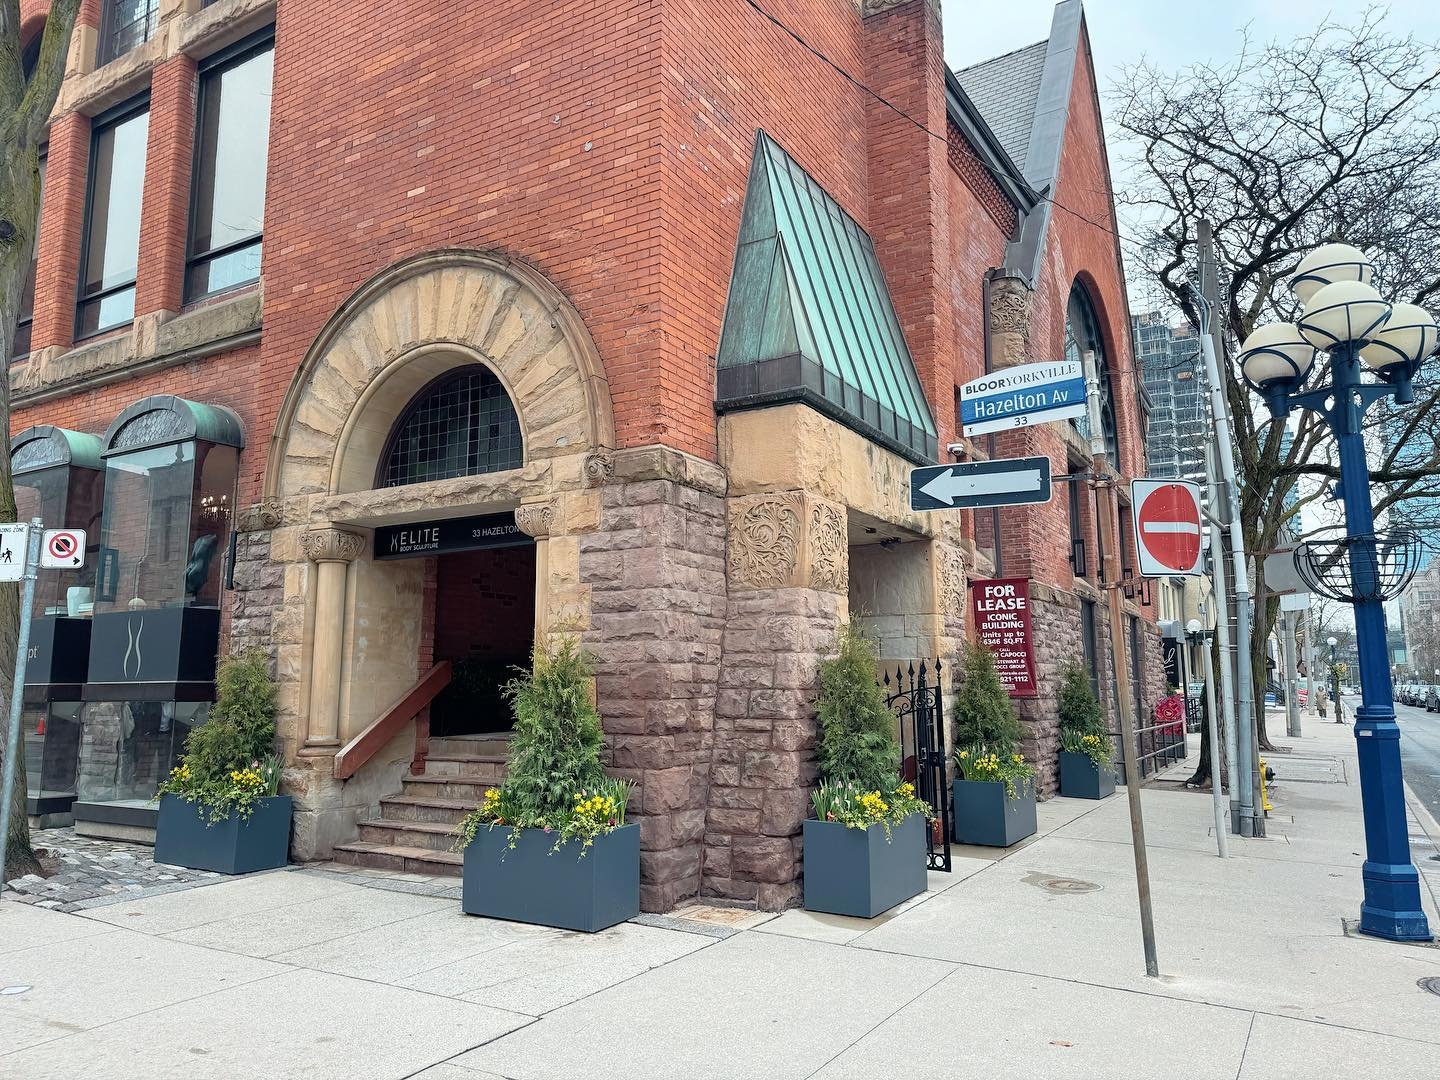 ⚠️Work in Progress⚠️
We&rsquo;ve been busy preparing 3,000 sq ft of commercial space for two new tenants in a beautiful historic building in the heart of Yorkville.